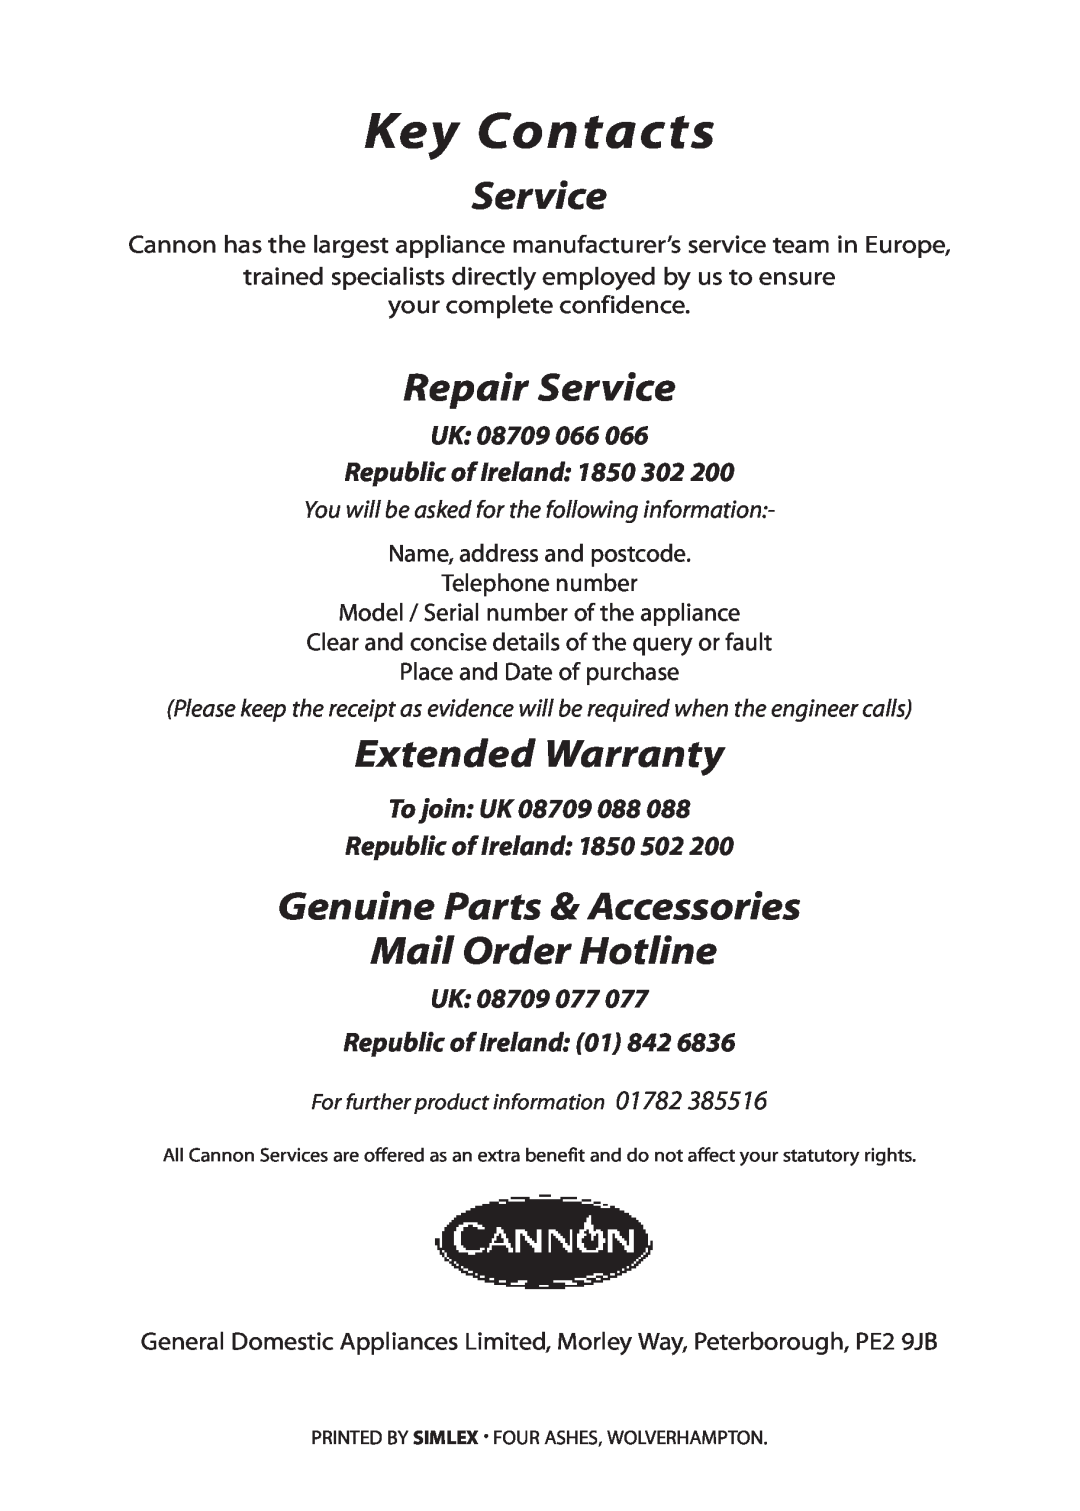 Cannon ICON 1000 Key Contacts, Repair Service, Extended Warranty, Genuine Parts & Accessories Mail Order Hotline 